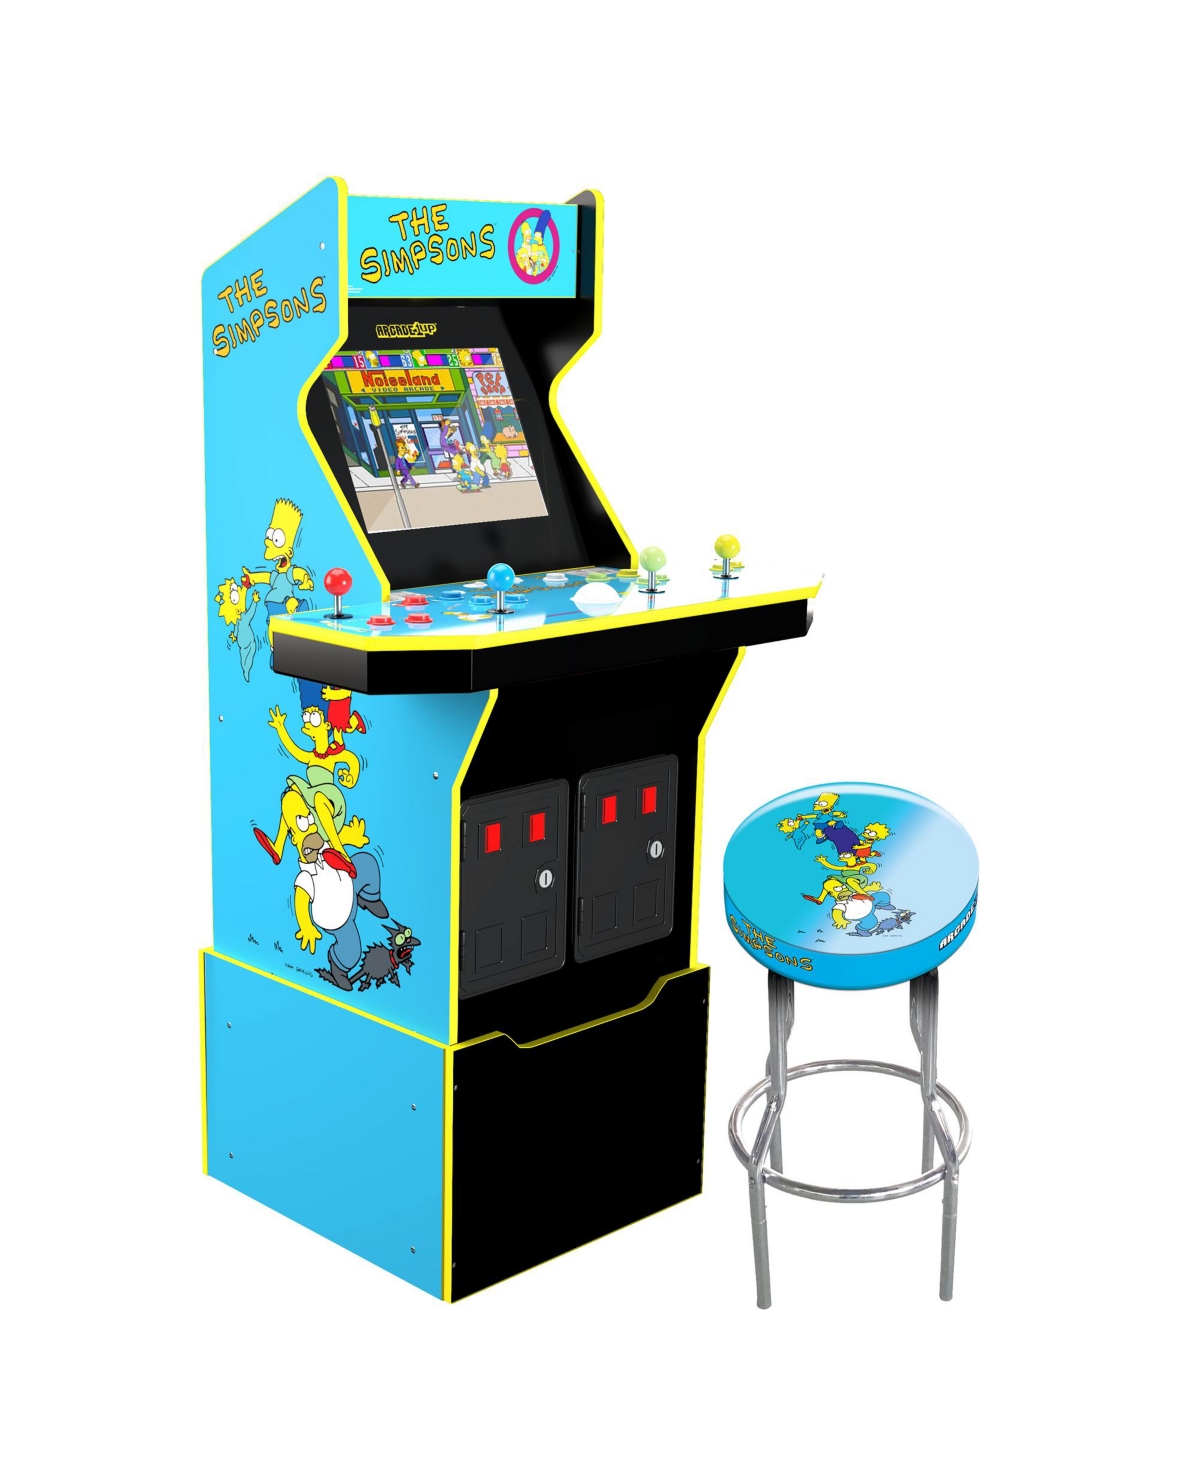 Arcade 1UP The Simpsons Arcade, 4-Player Game, with Stool